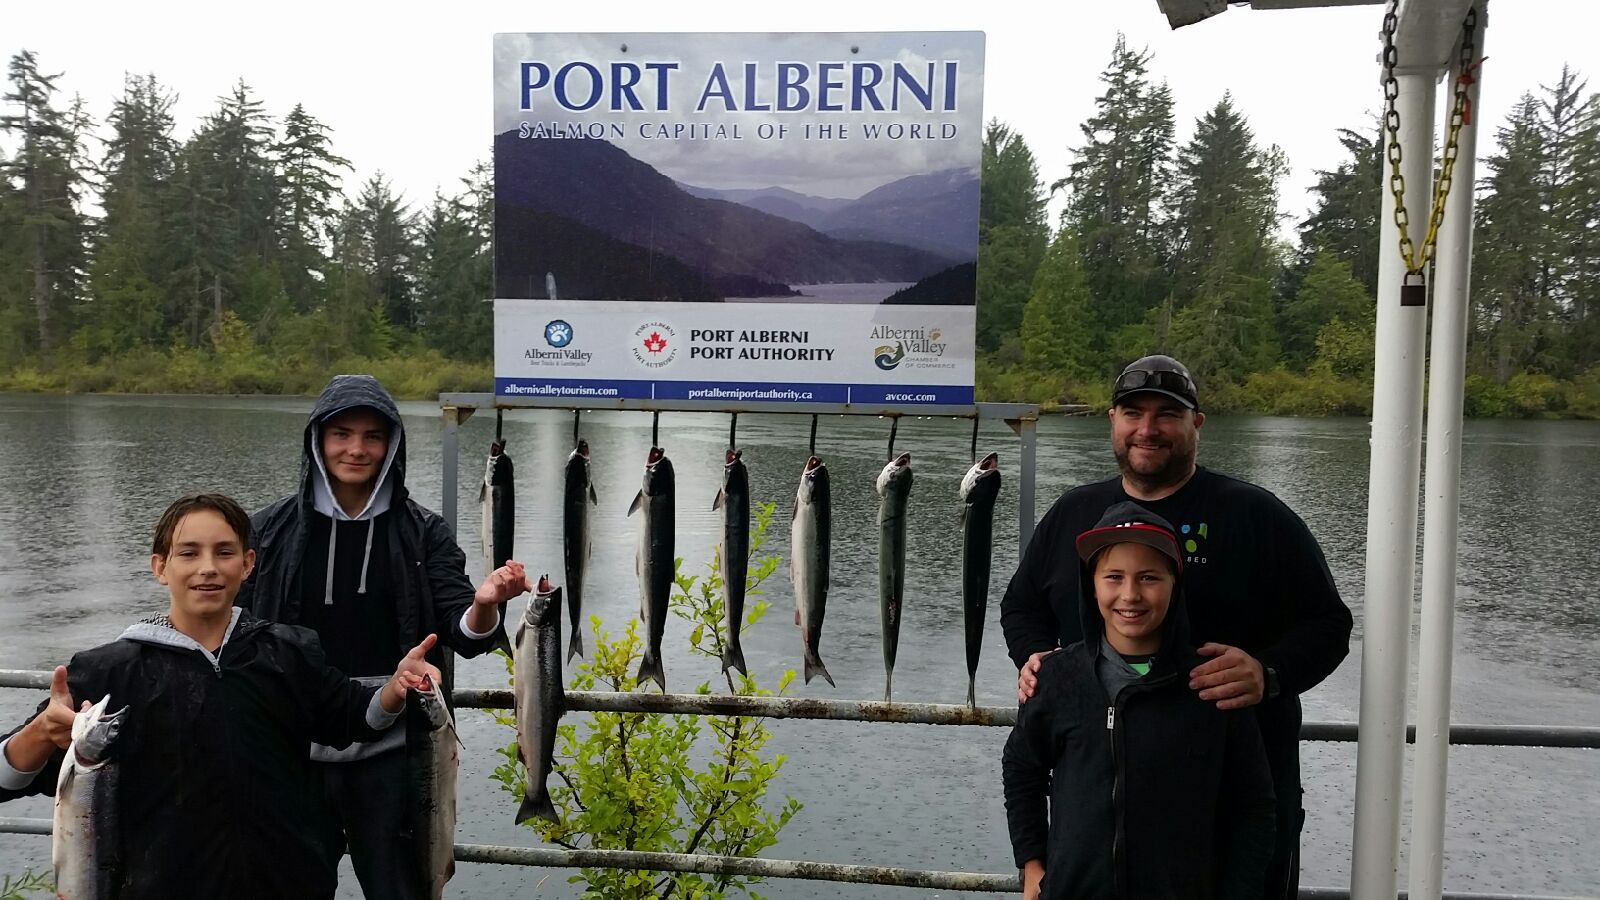 Sockeye Salmon fishing continued strong into August in the Alberni Inlet. Family from Kelowna fished with Slivers Charters and did extremely well on Sockeye Salmon